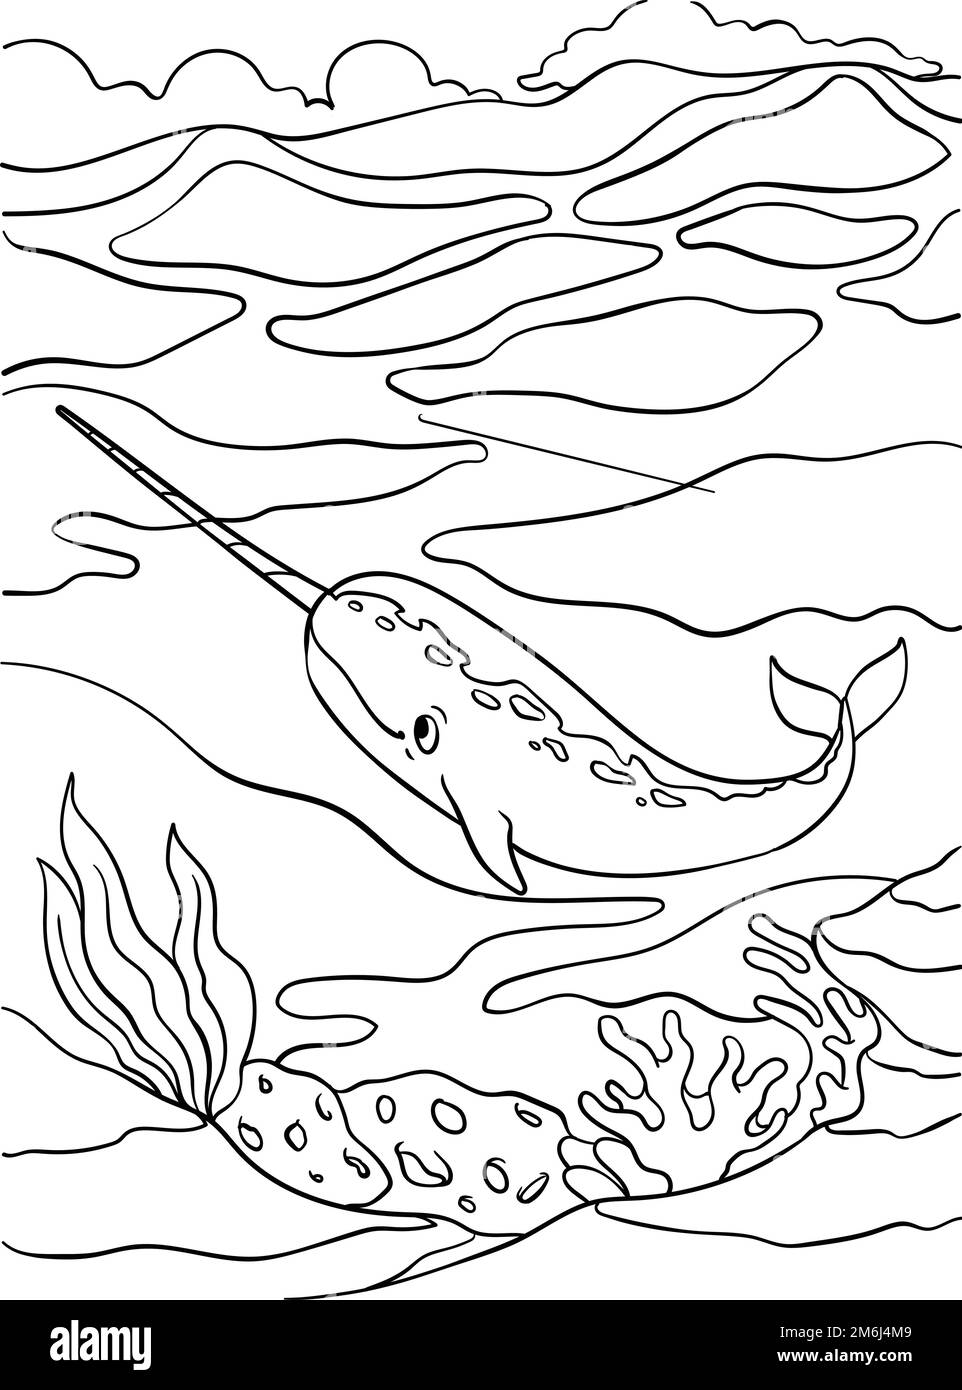 Narwhal Coloring Page for Kids Stock Vector